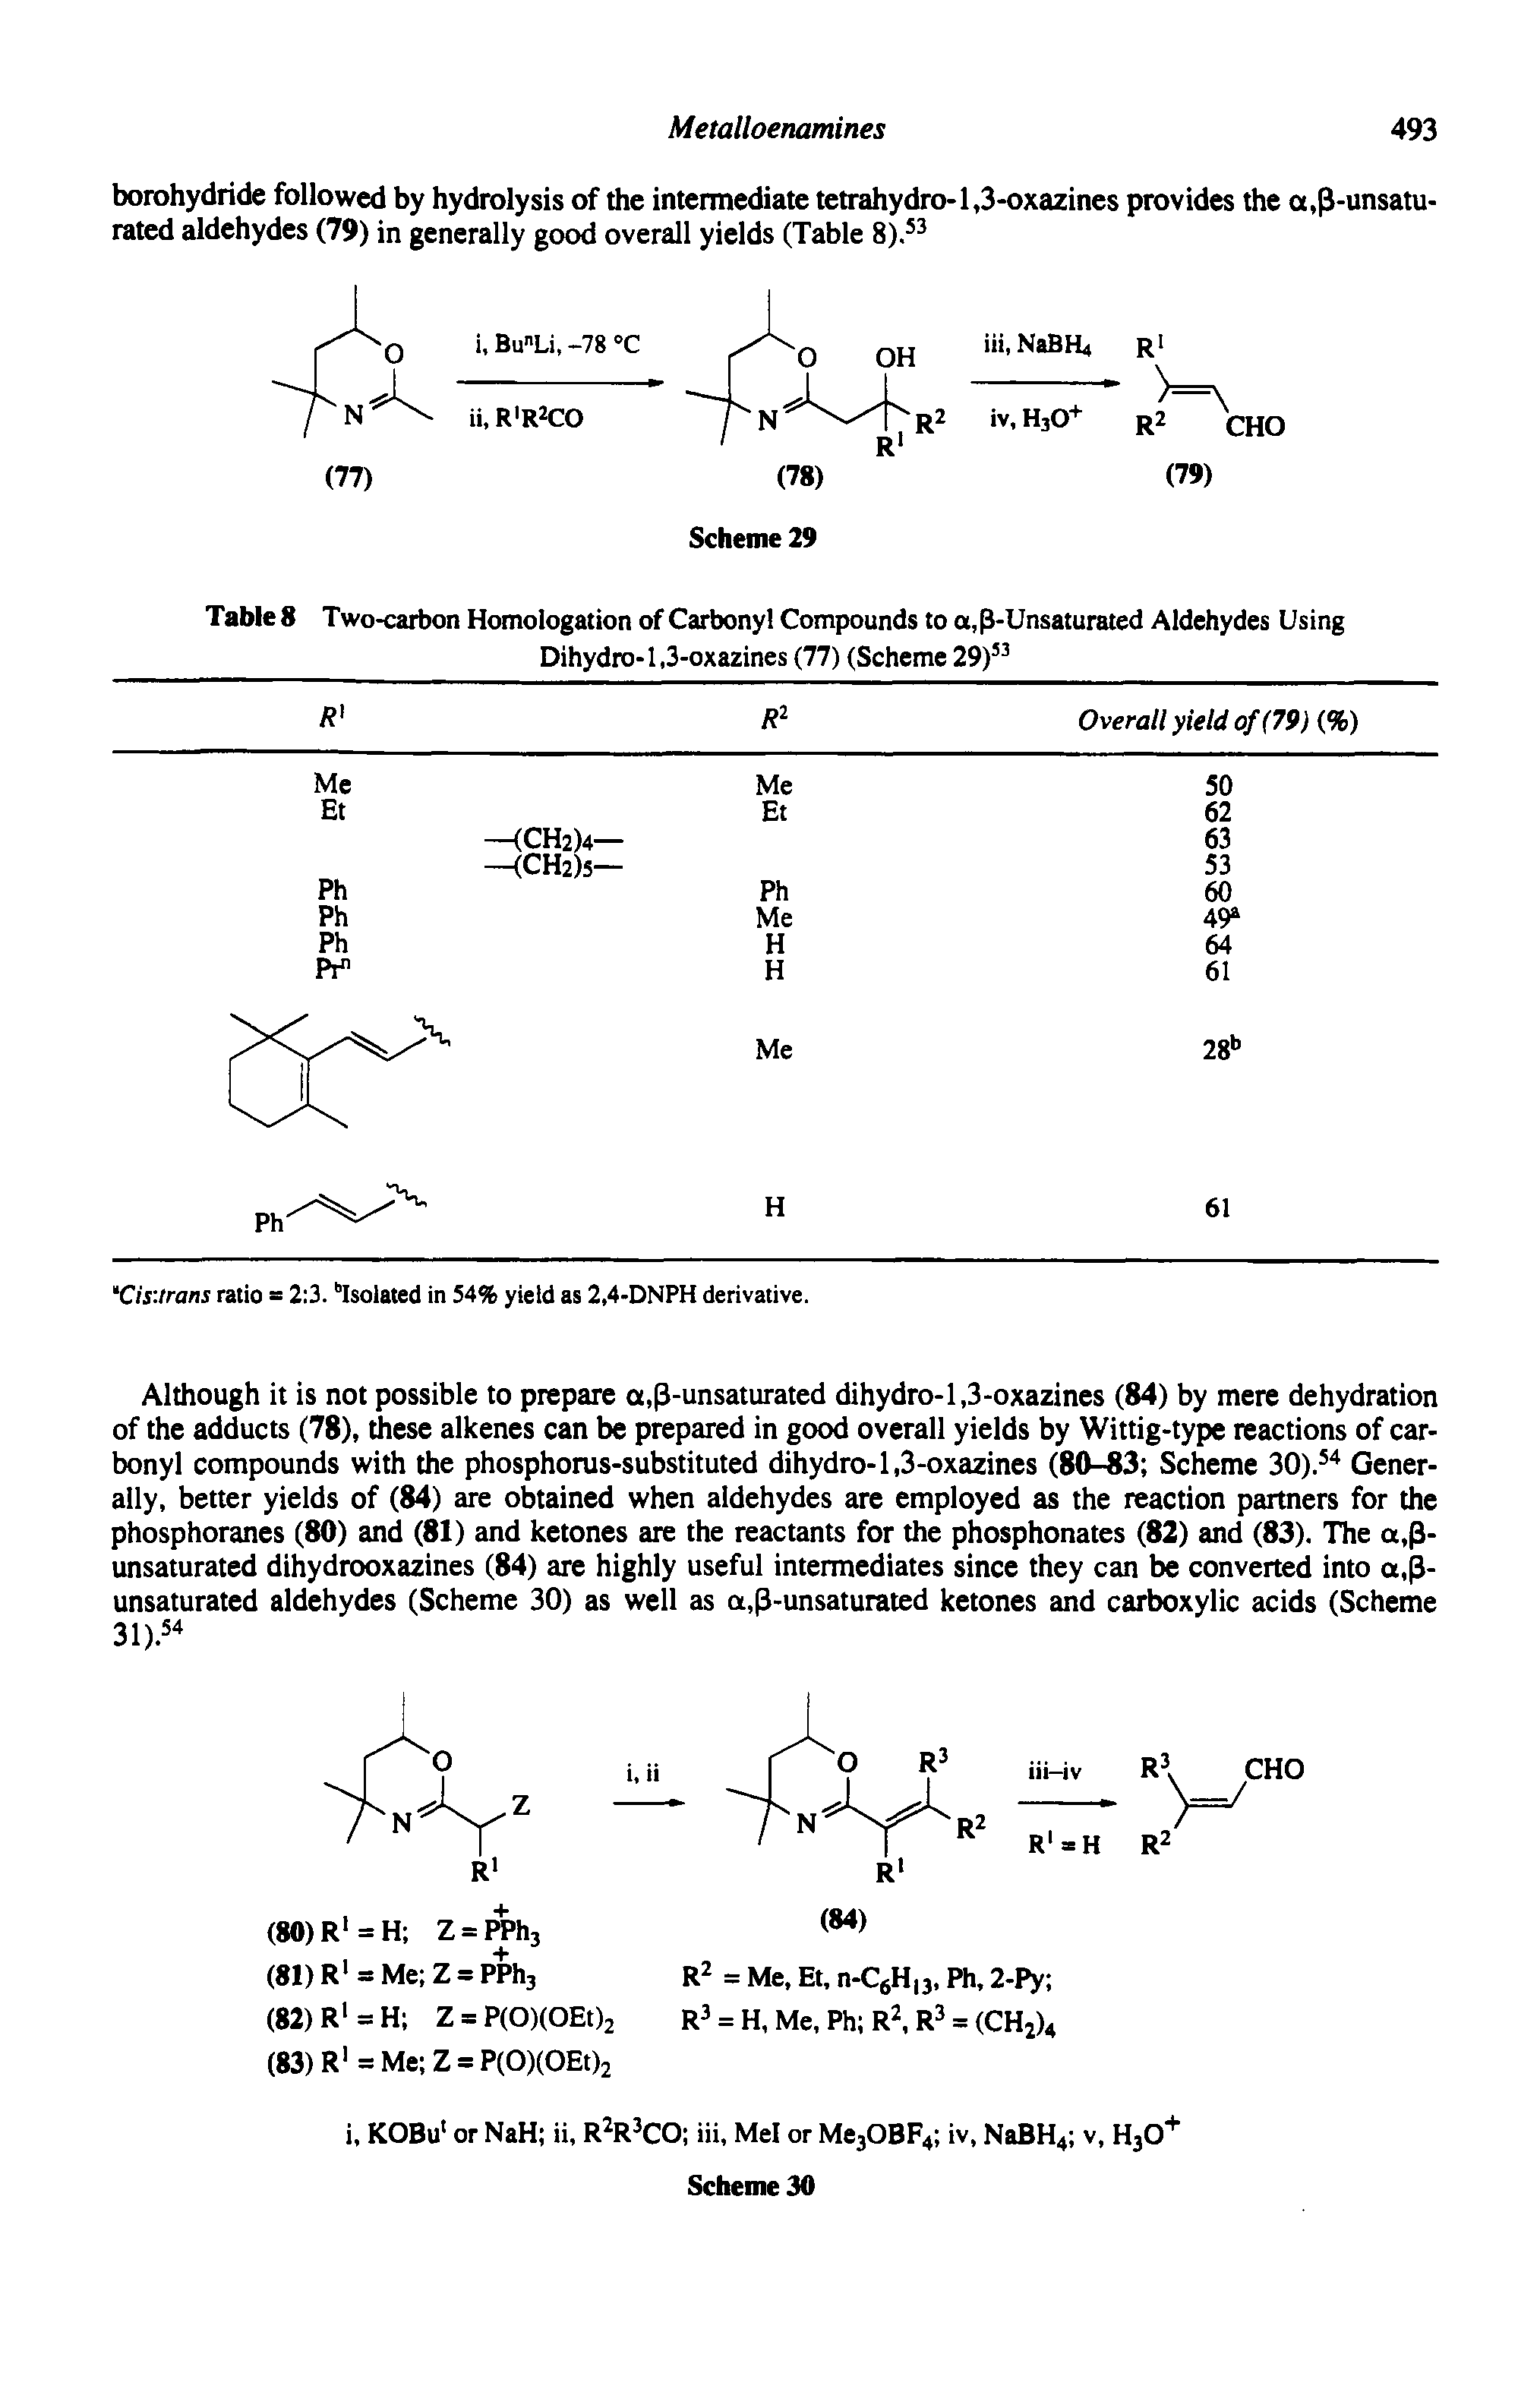 Table 8 Two-carbon Homologation of Carbonyl Compounds to a,p-Unsaturated Aldehydes Using Dihydro-1,3-oxazines (77) (Scheme 29) ...